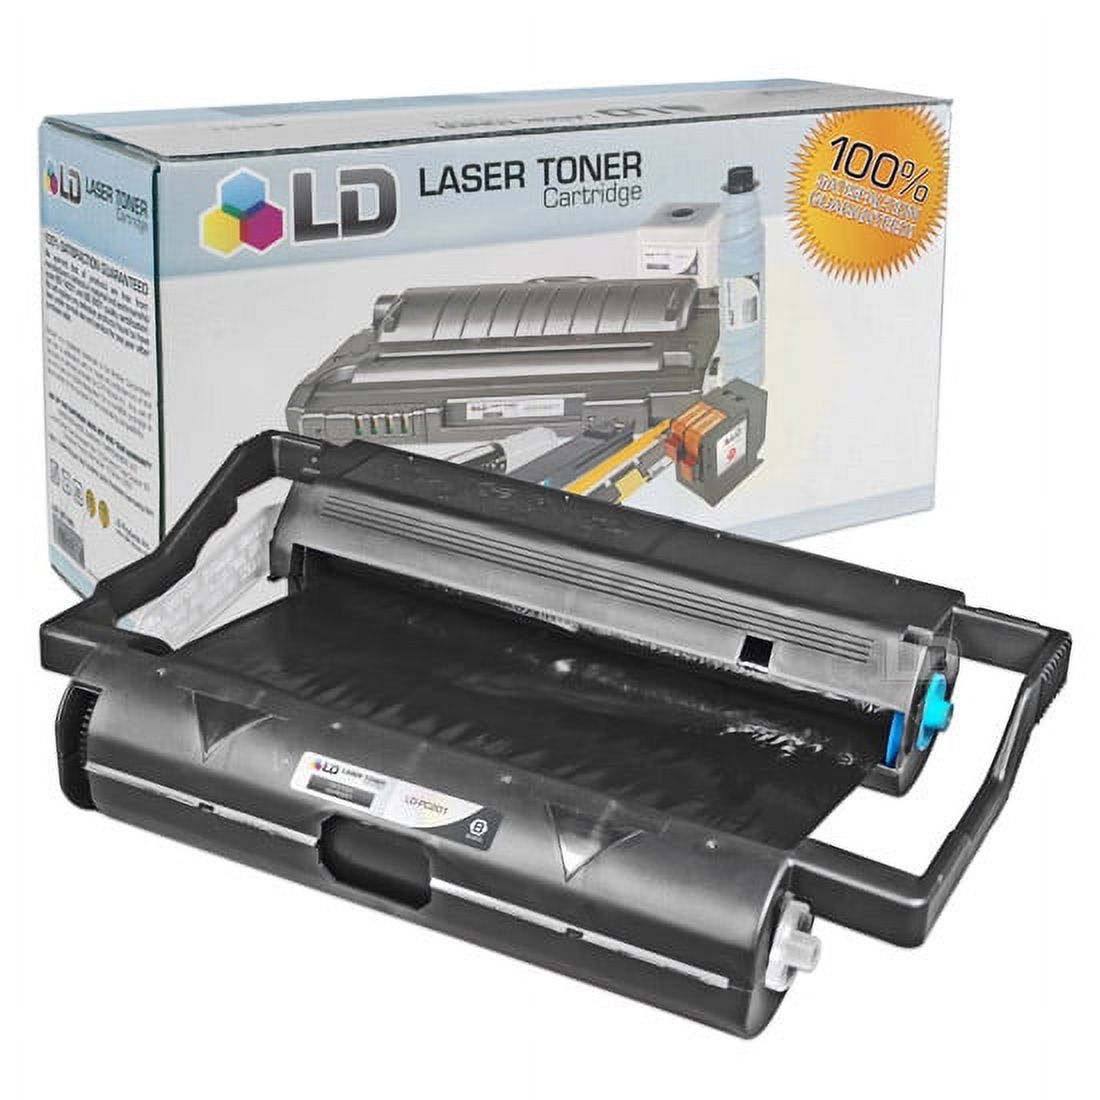 LD Compatible Replacement for PC201 Fax Cartridge With Roll for use in Intellifax 1170, 1270, 1270e, 1570MC, 1575MC, MFC 1770, 1780, 1870MC, and 1970MC Printers - image 1 of 1